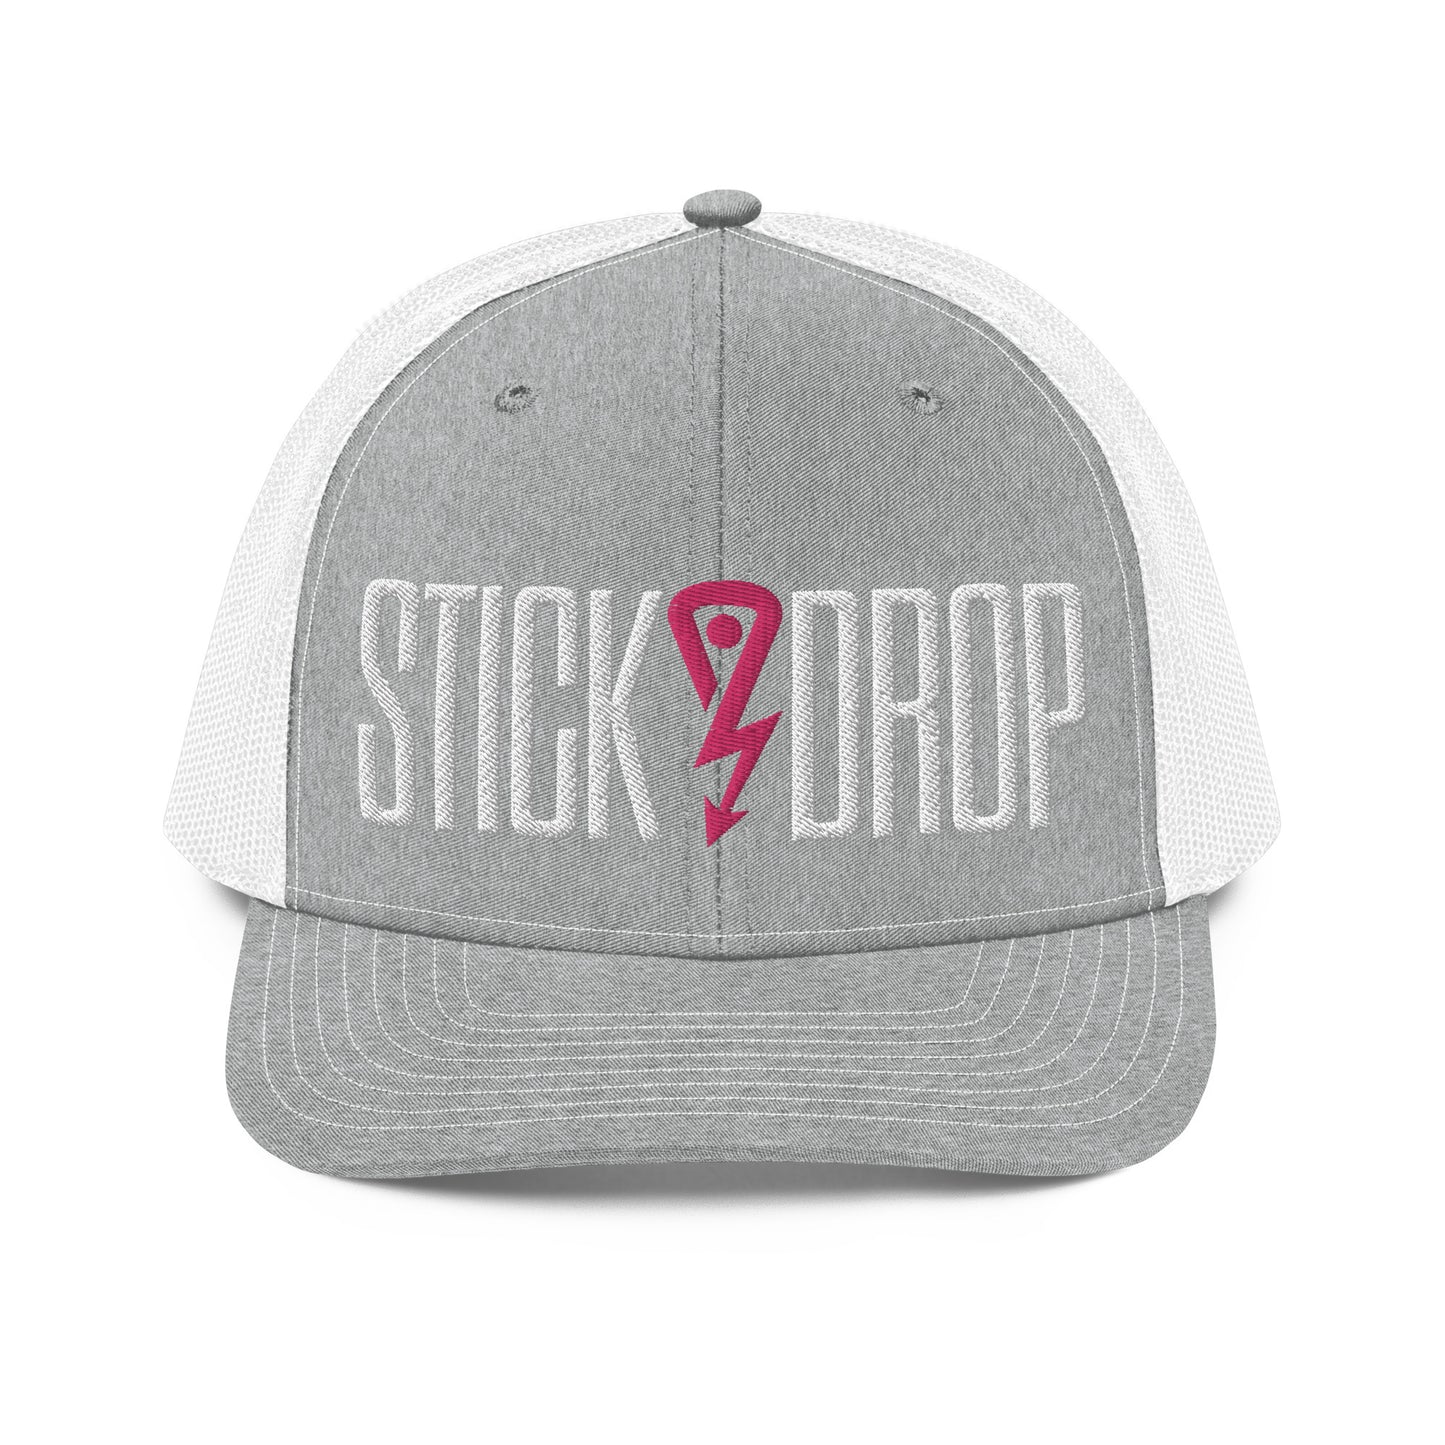 Gray Stick Drop Trucker Cap with white lettering and pink logo